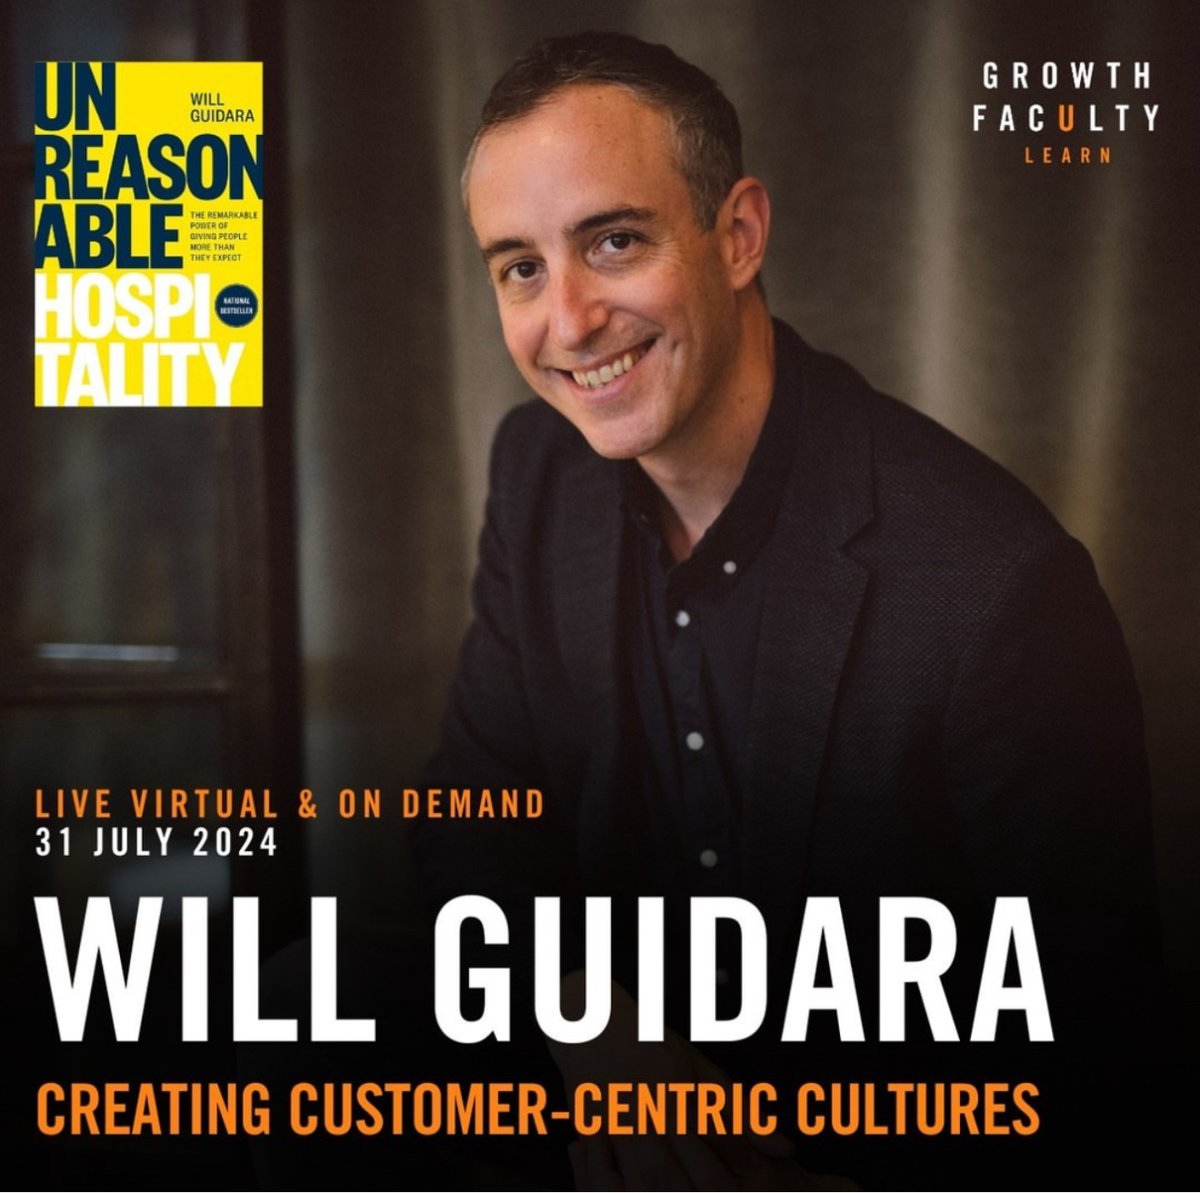 We're excited to announce our next headline speaker! A leader who reached #1 in the world in their industry, famous restaurateur #WillGuidara, whose bestseller 'Unreasonable Hospitality' and viral TED Talk have inspired leaders everywhere >  bit.ly/3W4ExcW